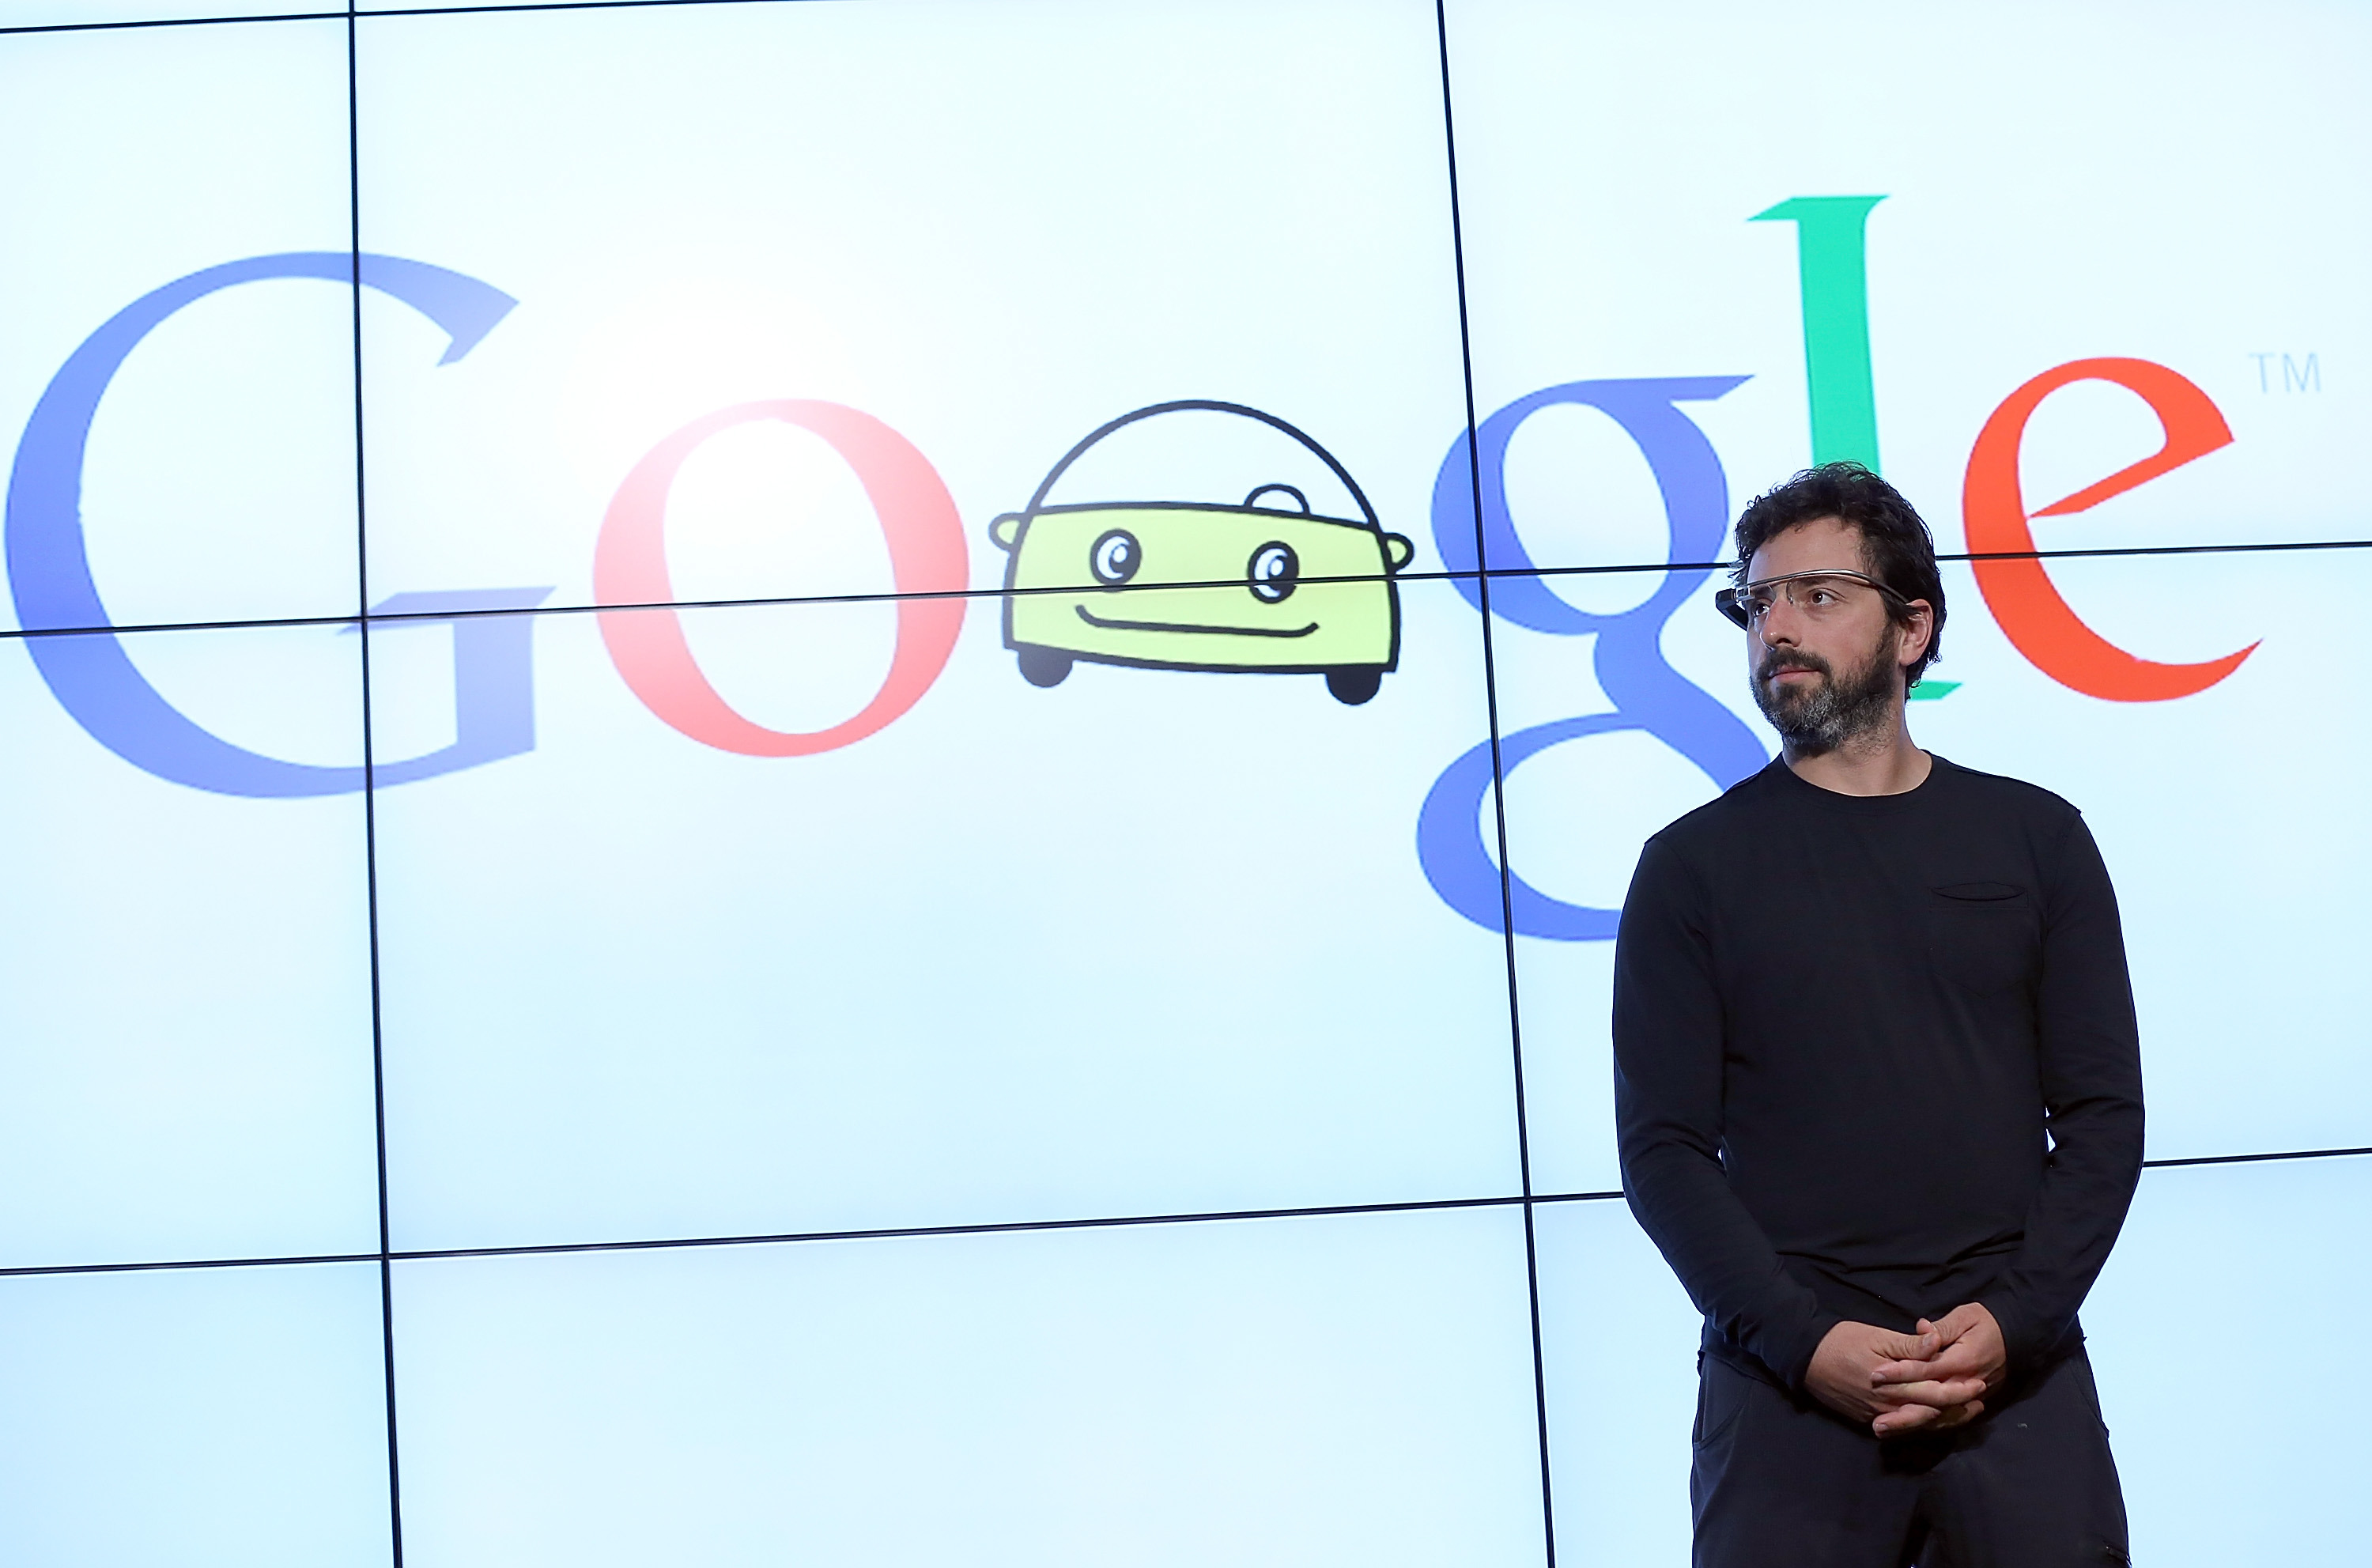 Google co-founder Sergey Brin speaks about driverless cars in September 2012 at Google headquarters. (Justin Sullivan&mdash;Getty Images)